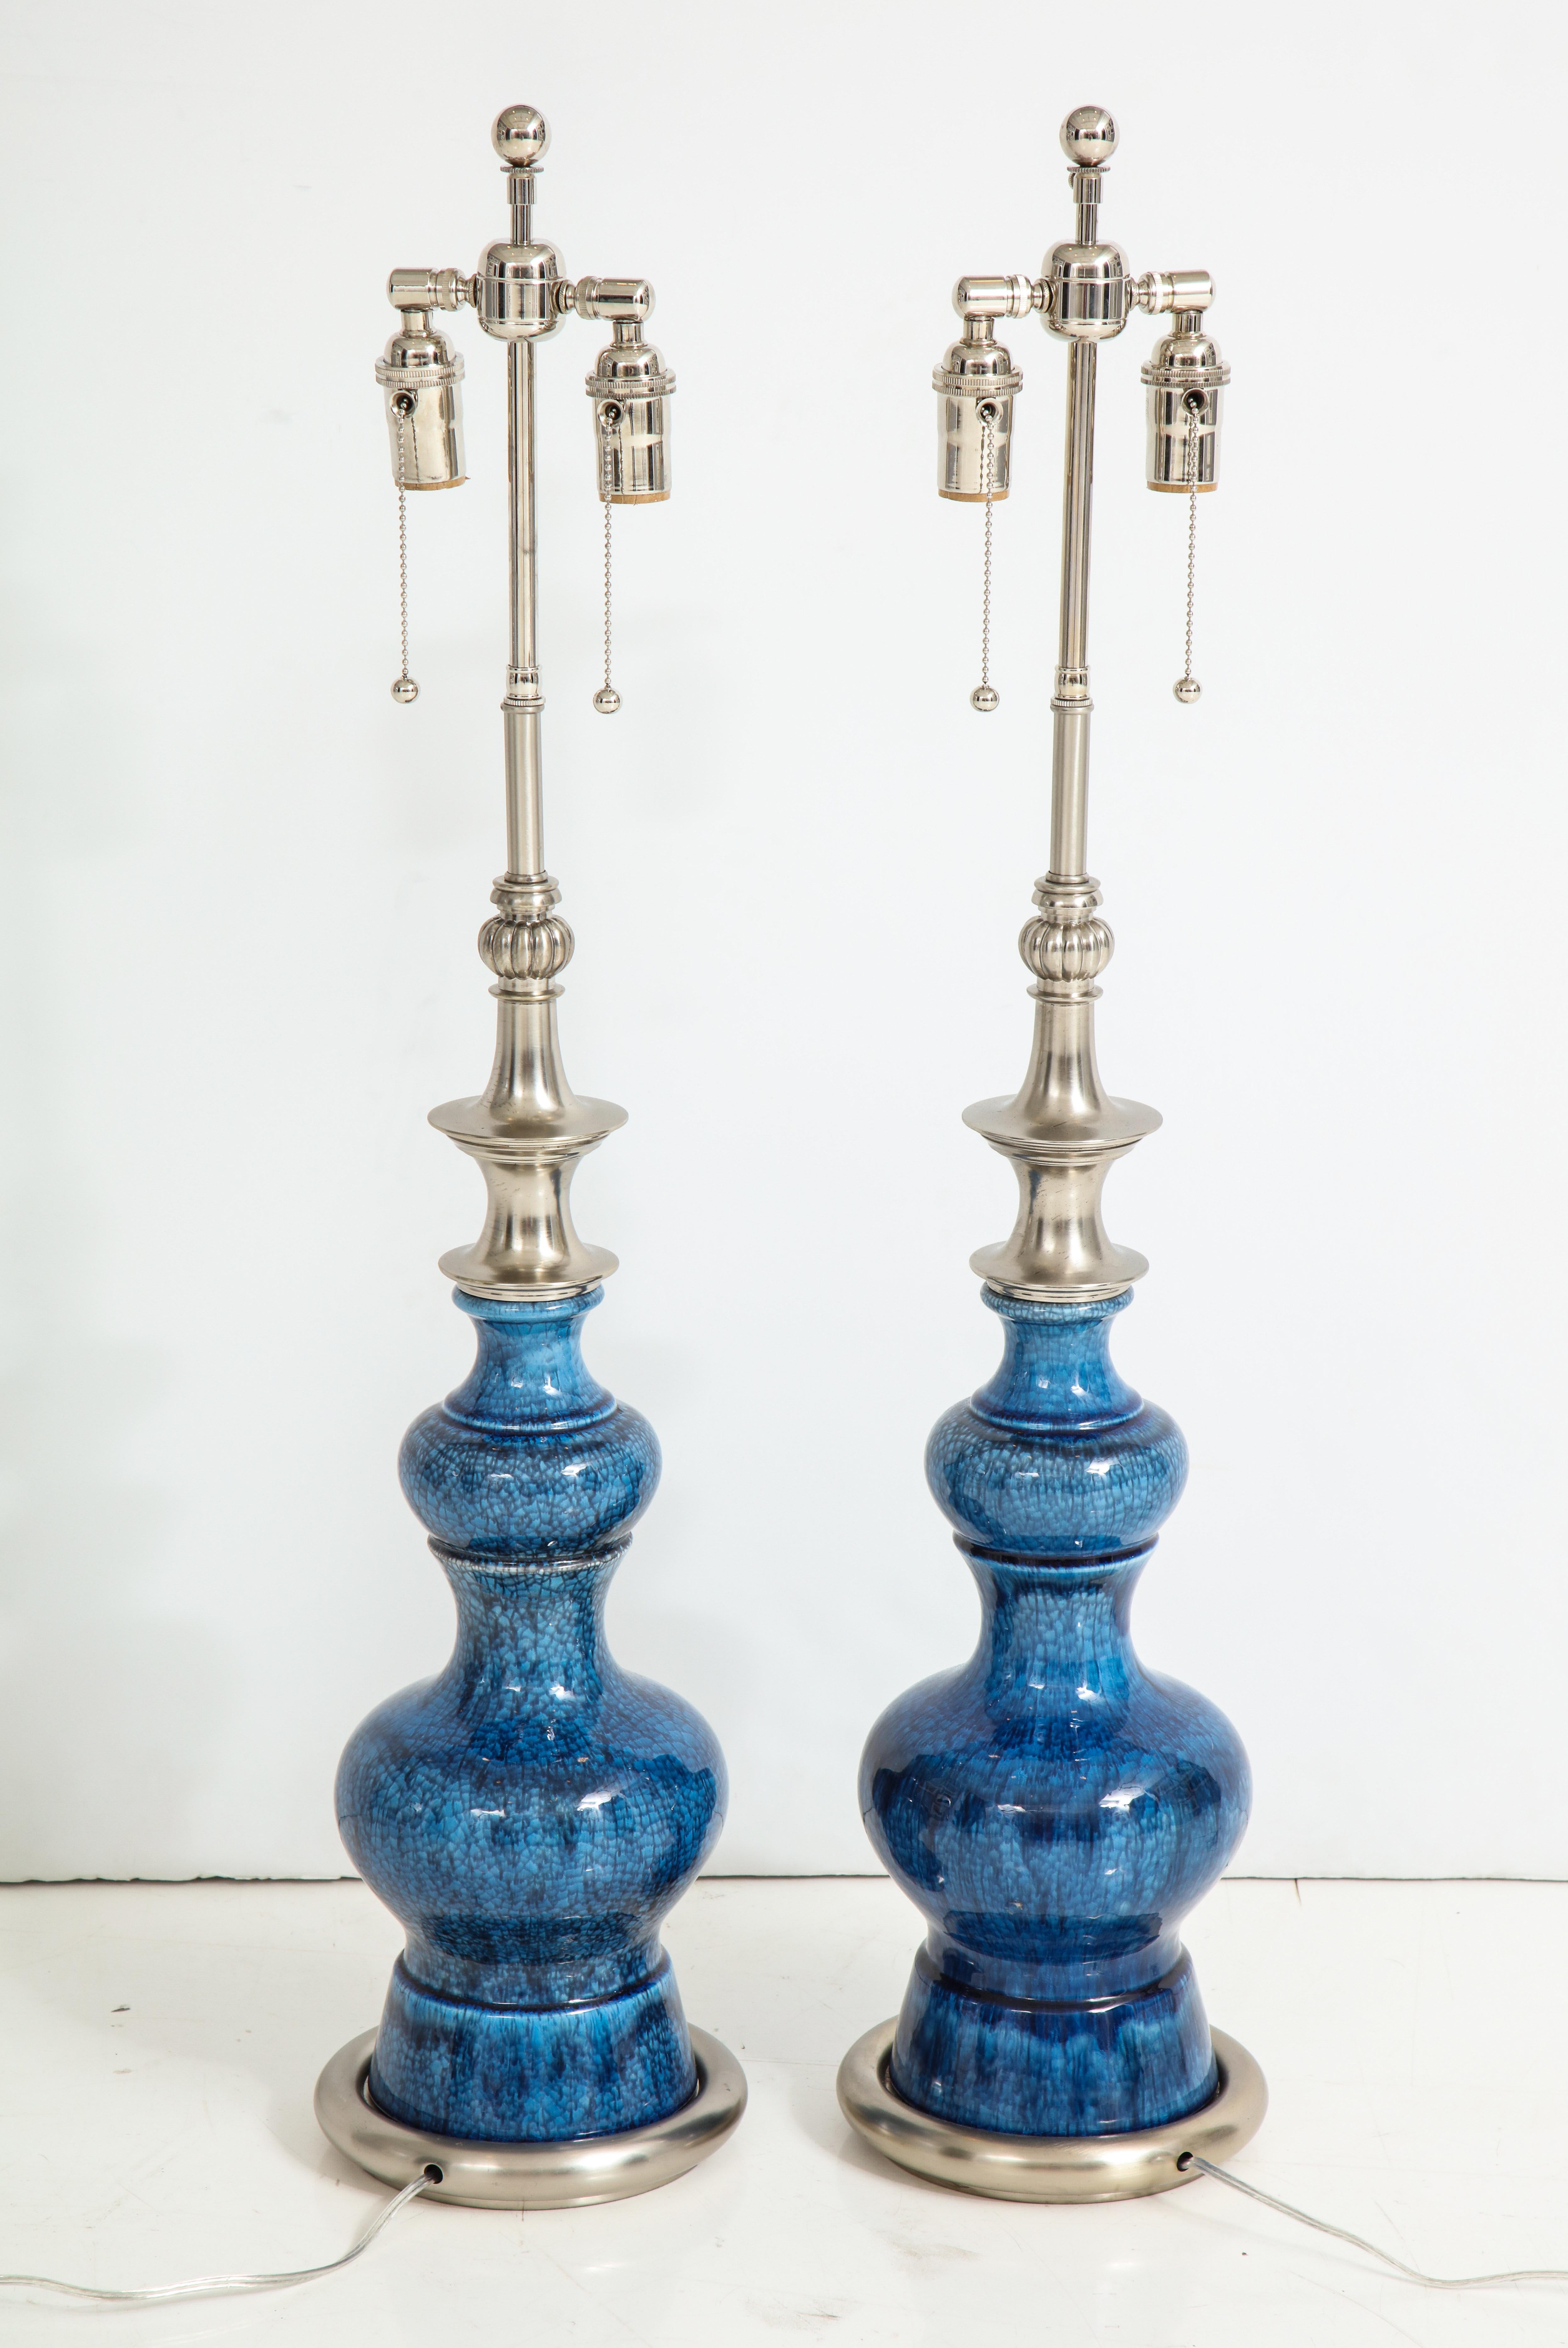 Pair of large 1960s Stiffel ceramic lamps with a beautiful blue crackle glaze finish.
The lamps are mounted on brushed satin nickel bases and nickel hardware.
They have been newly rewired for the US with double clusters that take standard light